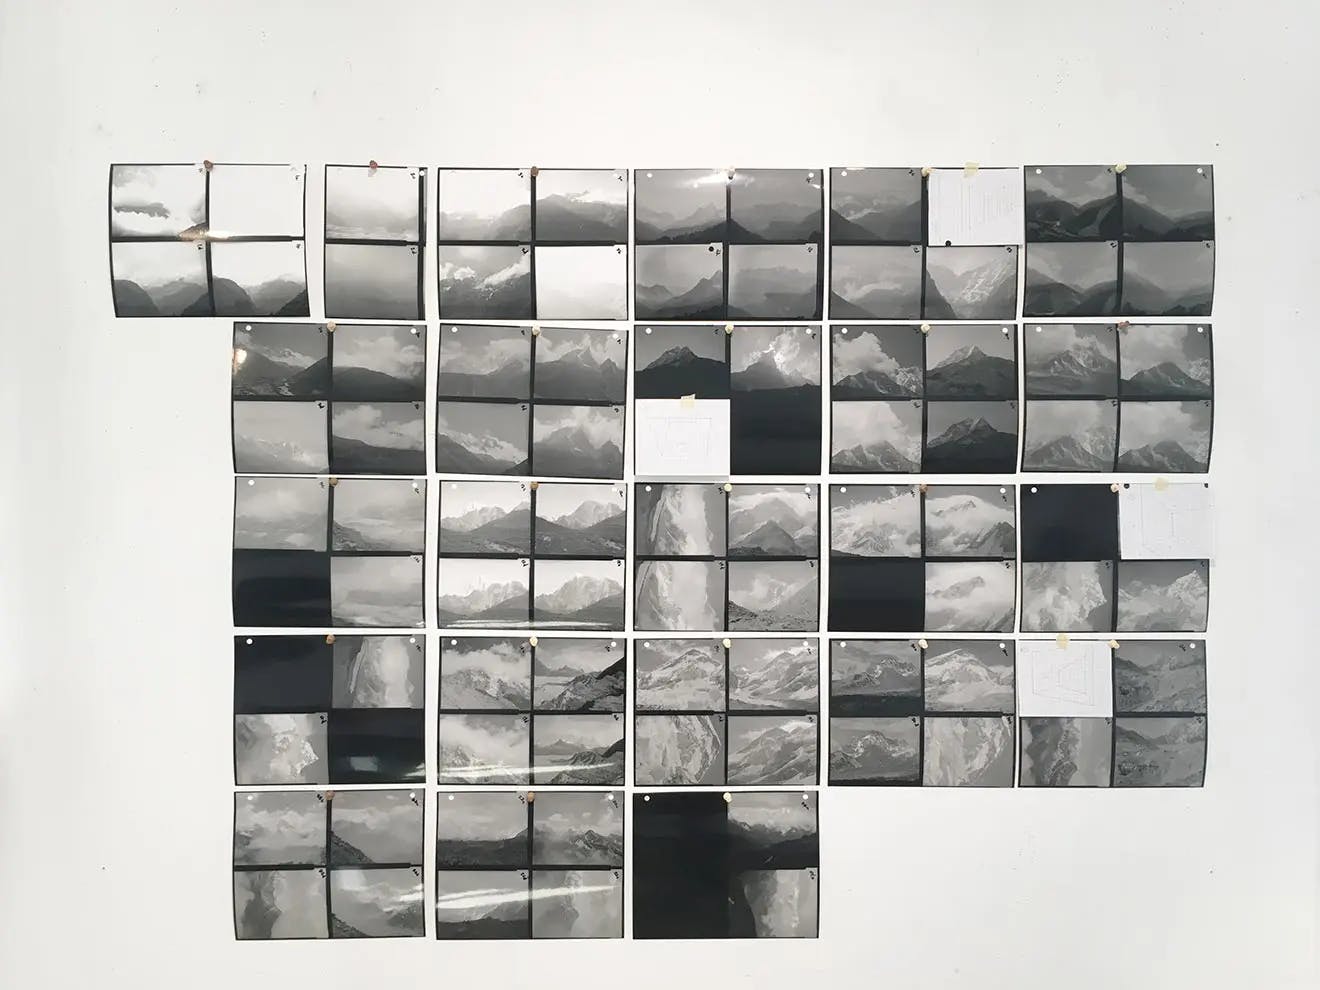 Journal: Millee on 'Mount Analogue': Gallery